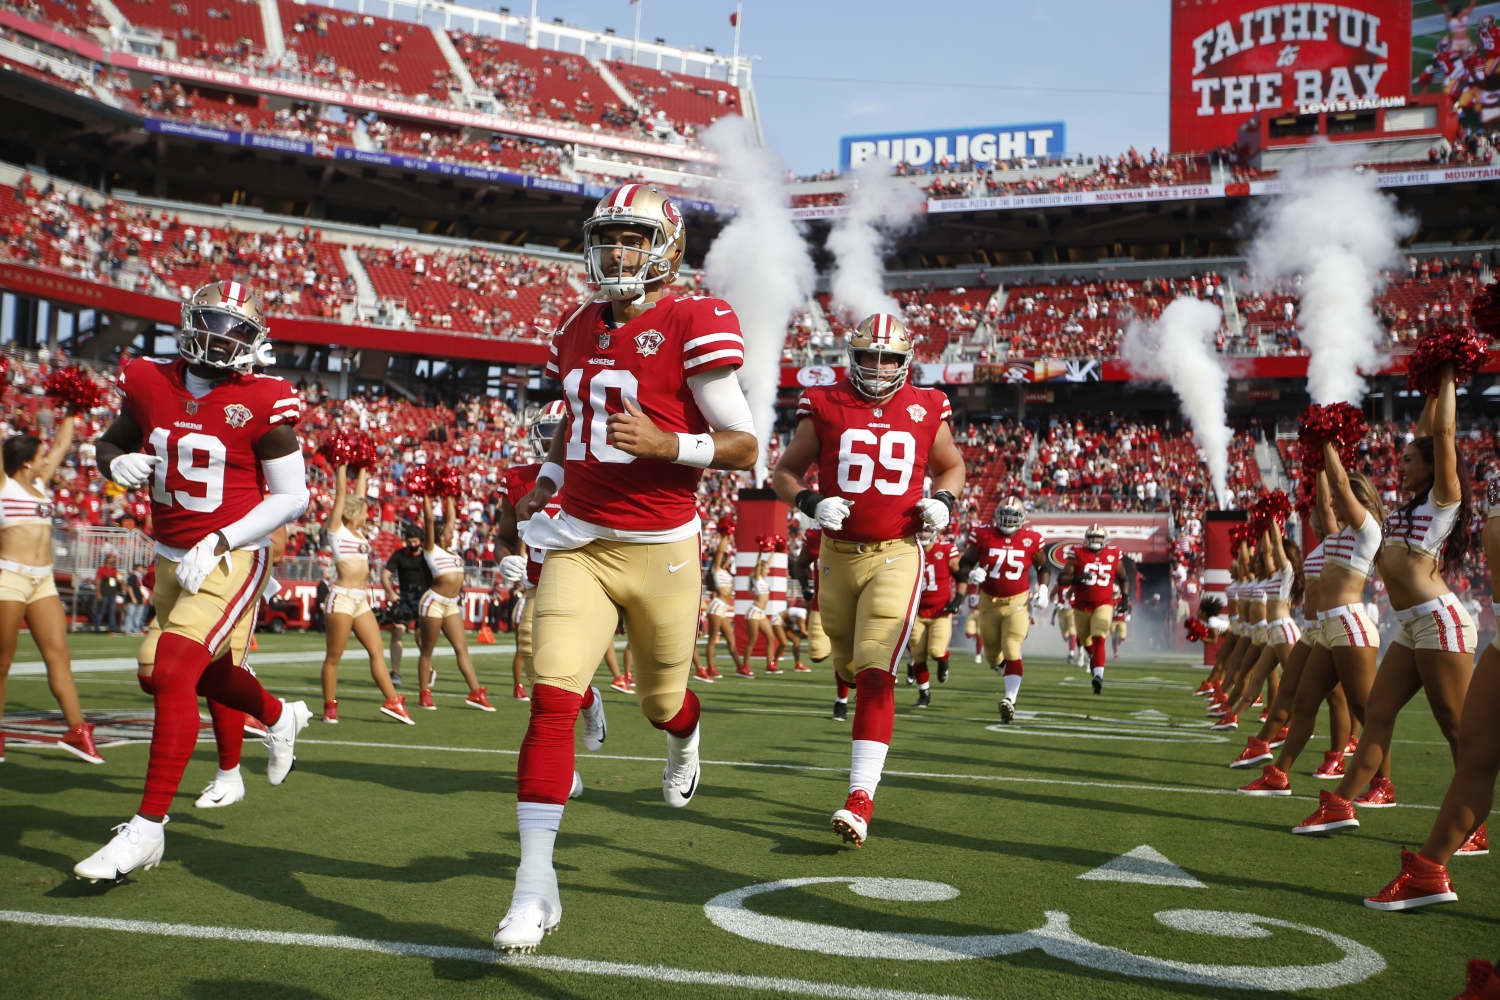 Jimmy Garoppolo jogs onto the field with his San Francisco 49ers teammates.